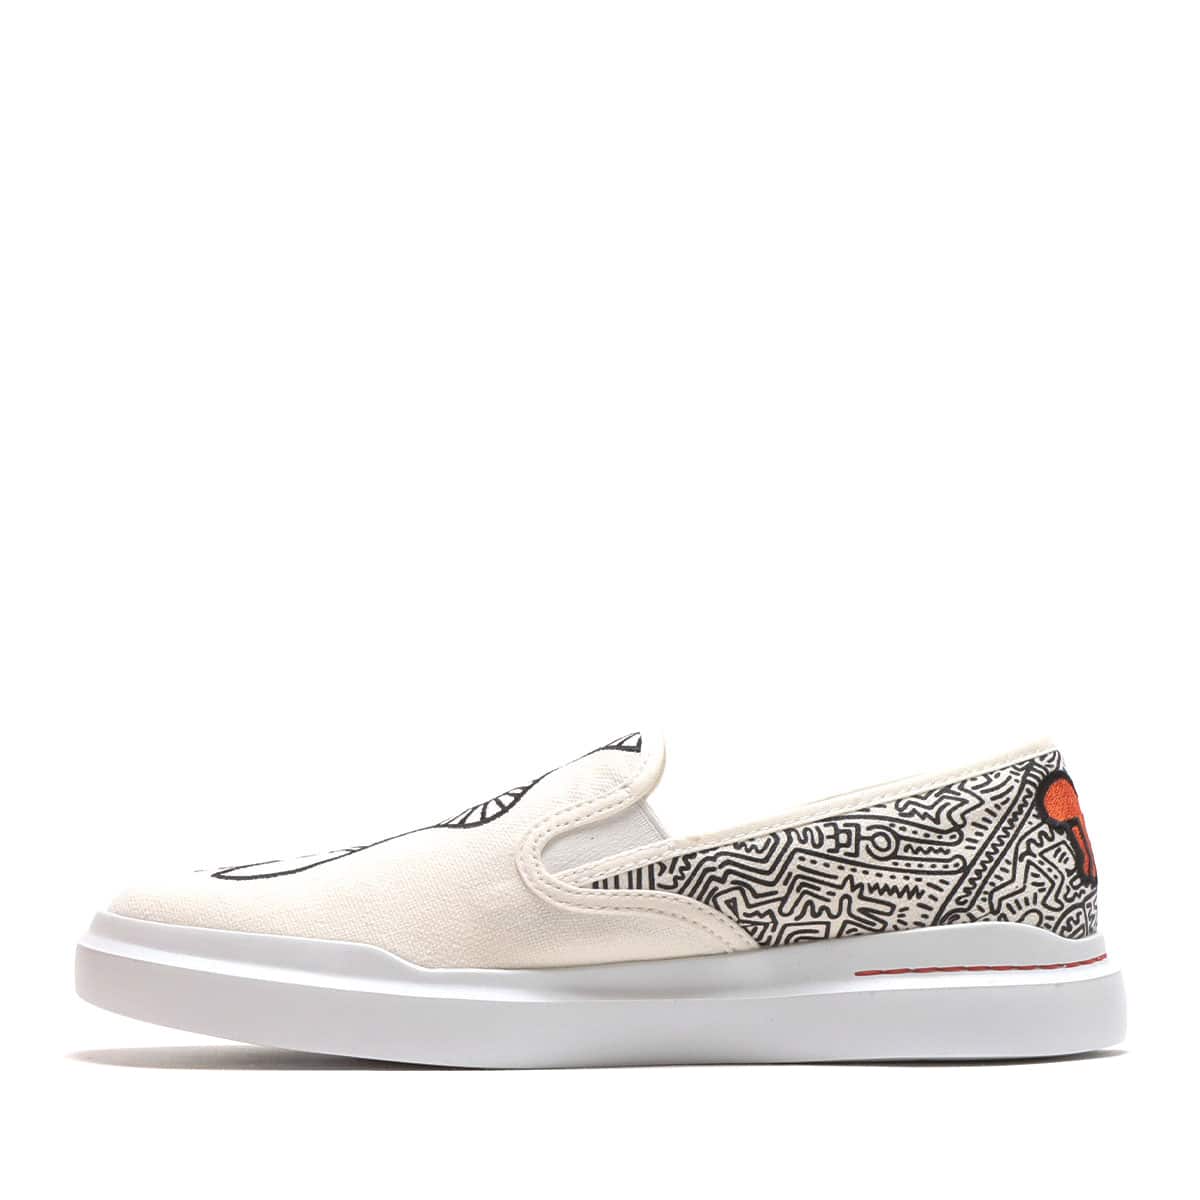 COLE HAAN x KEITH HARING GRANDPRO RALLY SLIPON WHITE/BLACK/FLAME